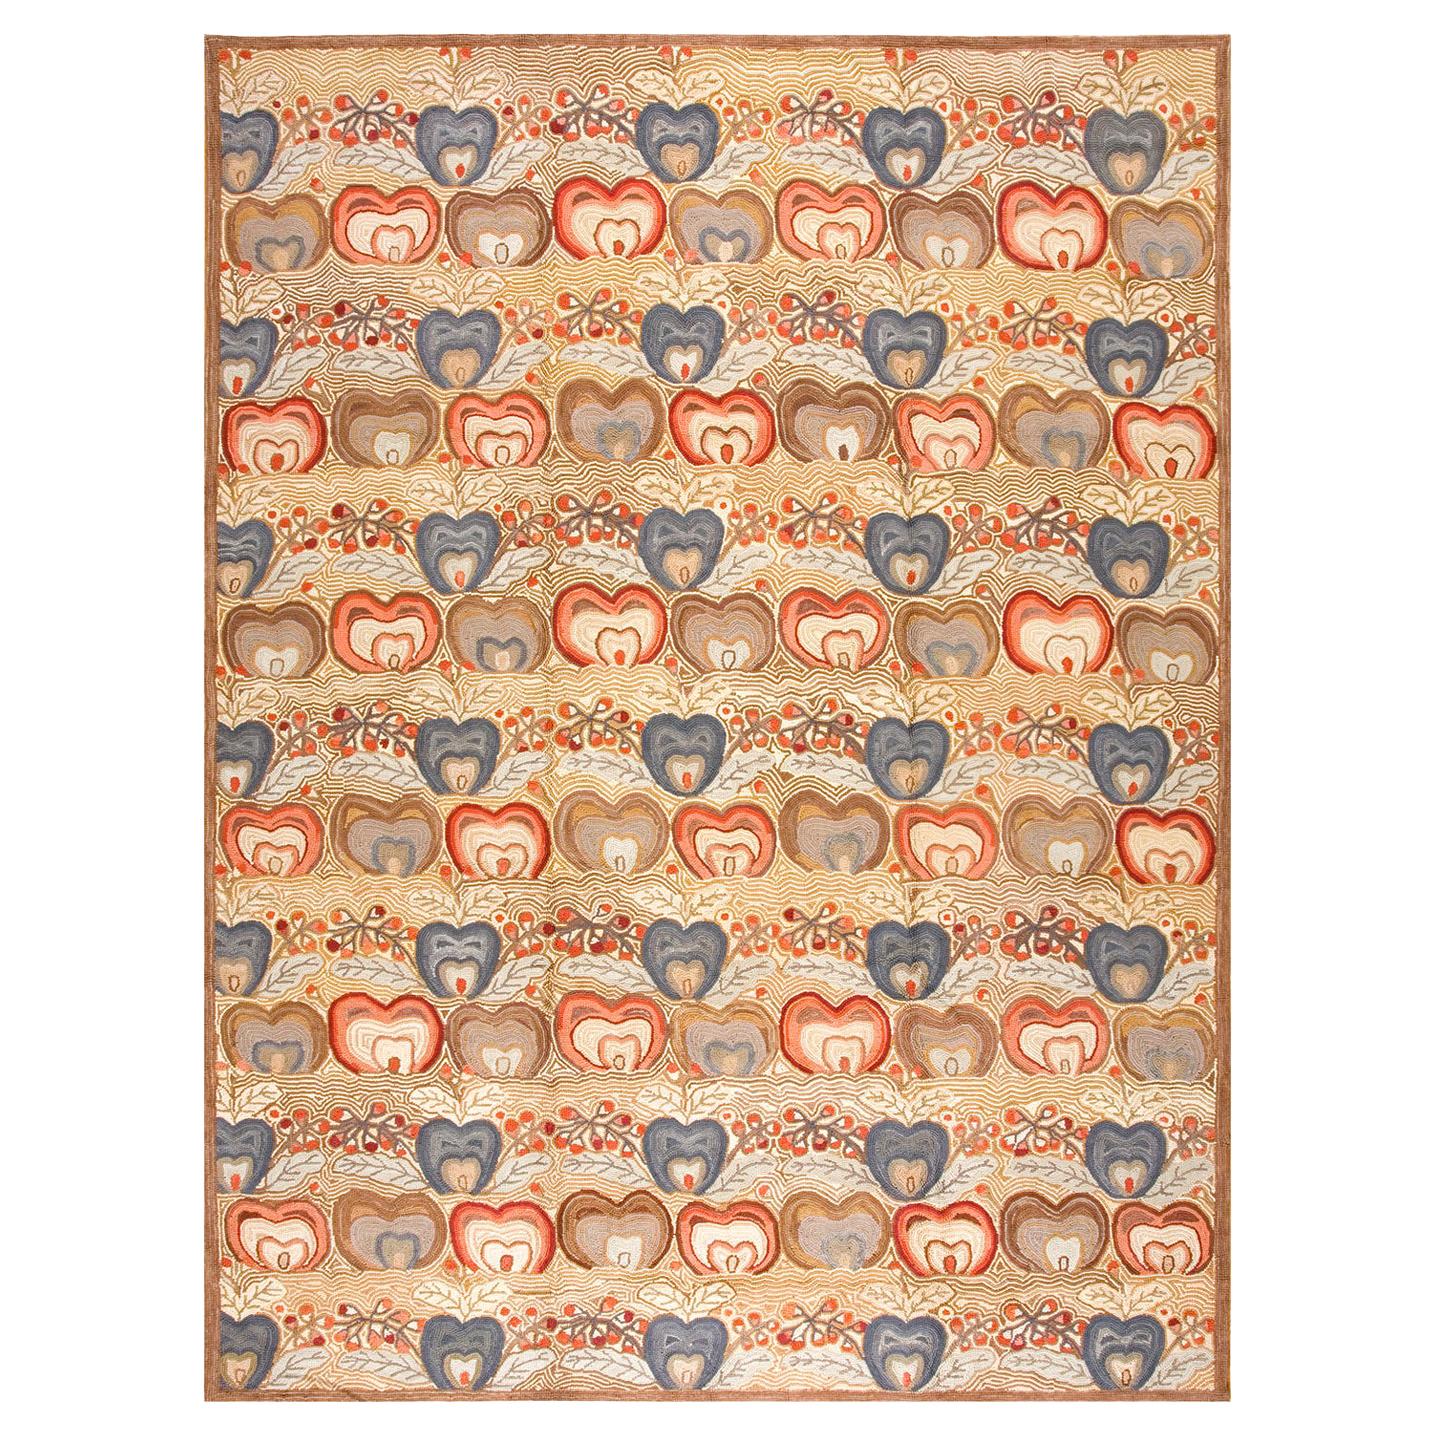 Contemporary Handwoven Cotton Hooked Rug ( 6' x 9' - 183 x 274 cm )